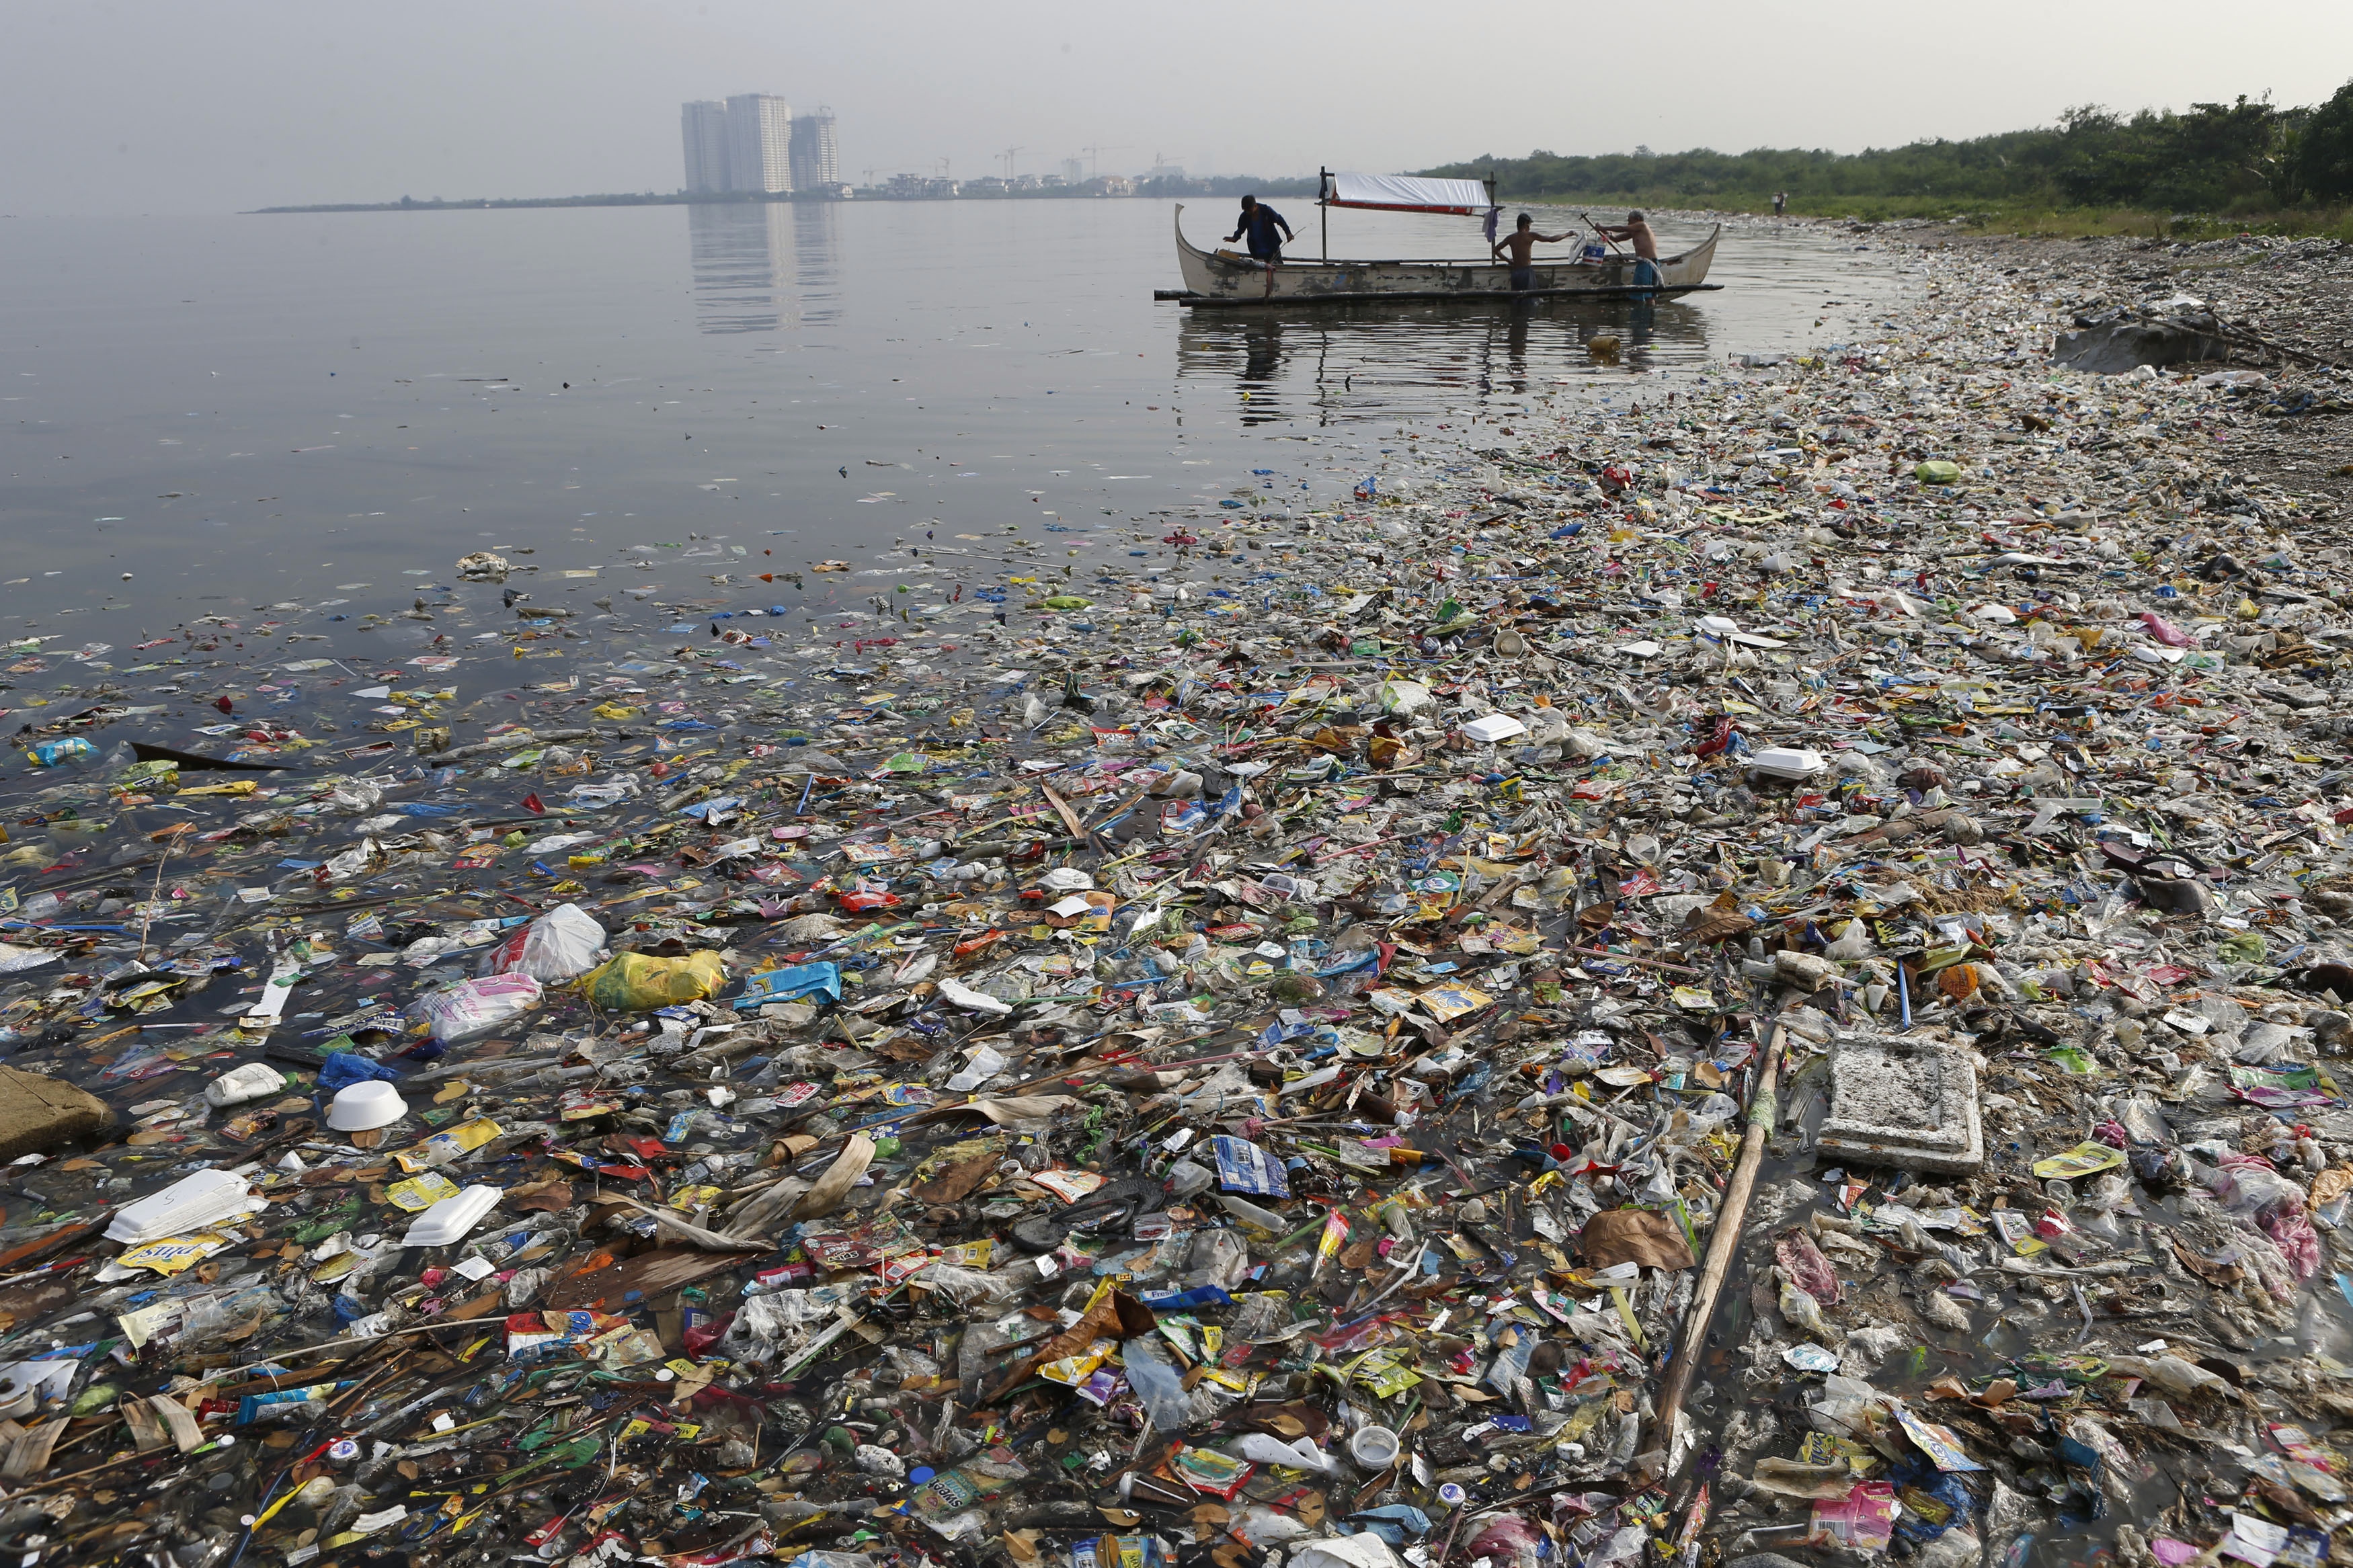 World's oceans clogged by millions of tons of plastic trash